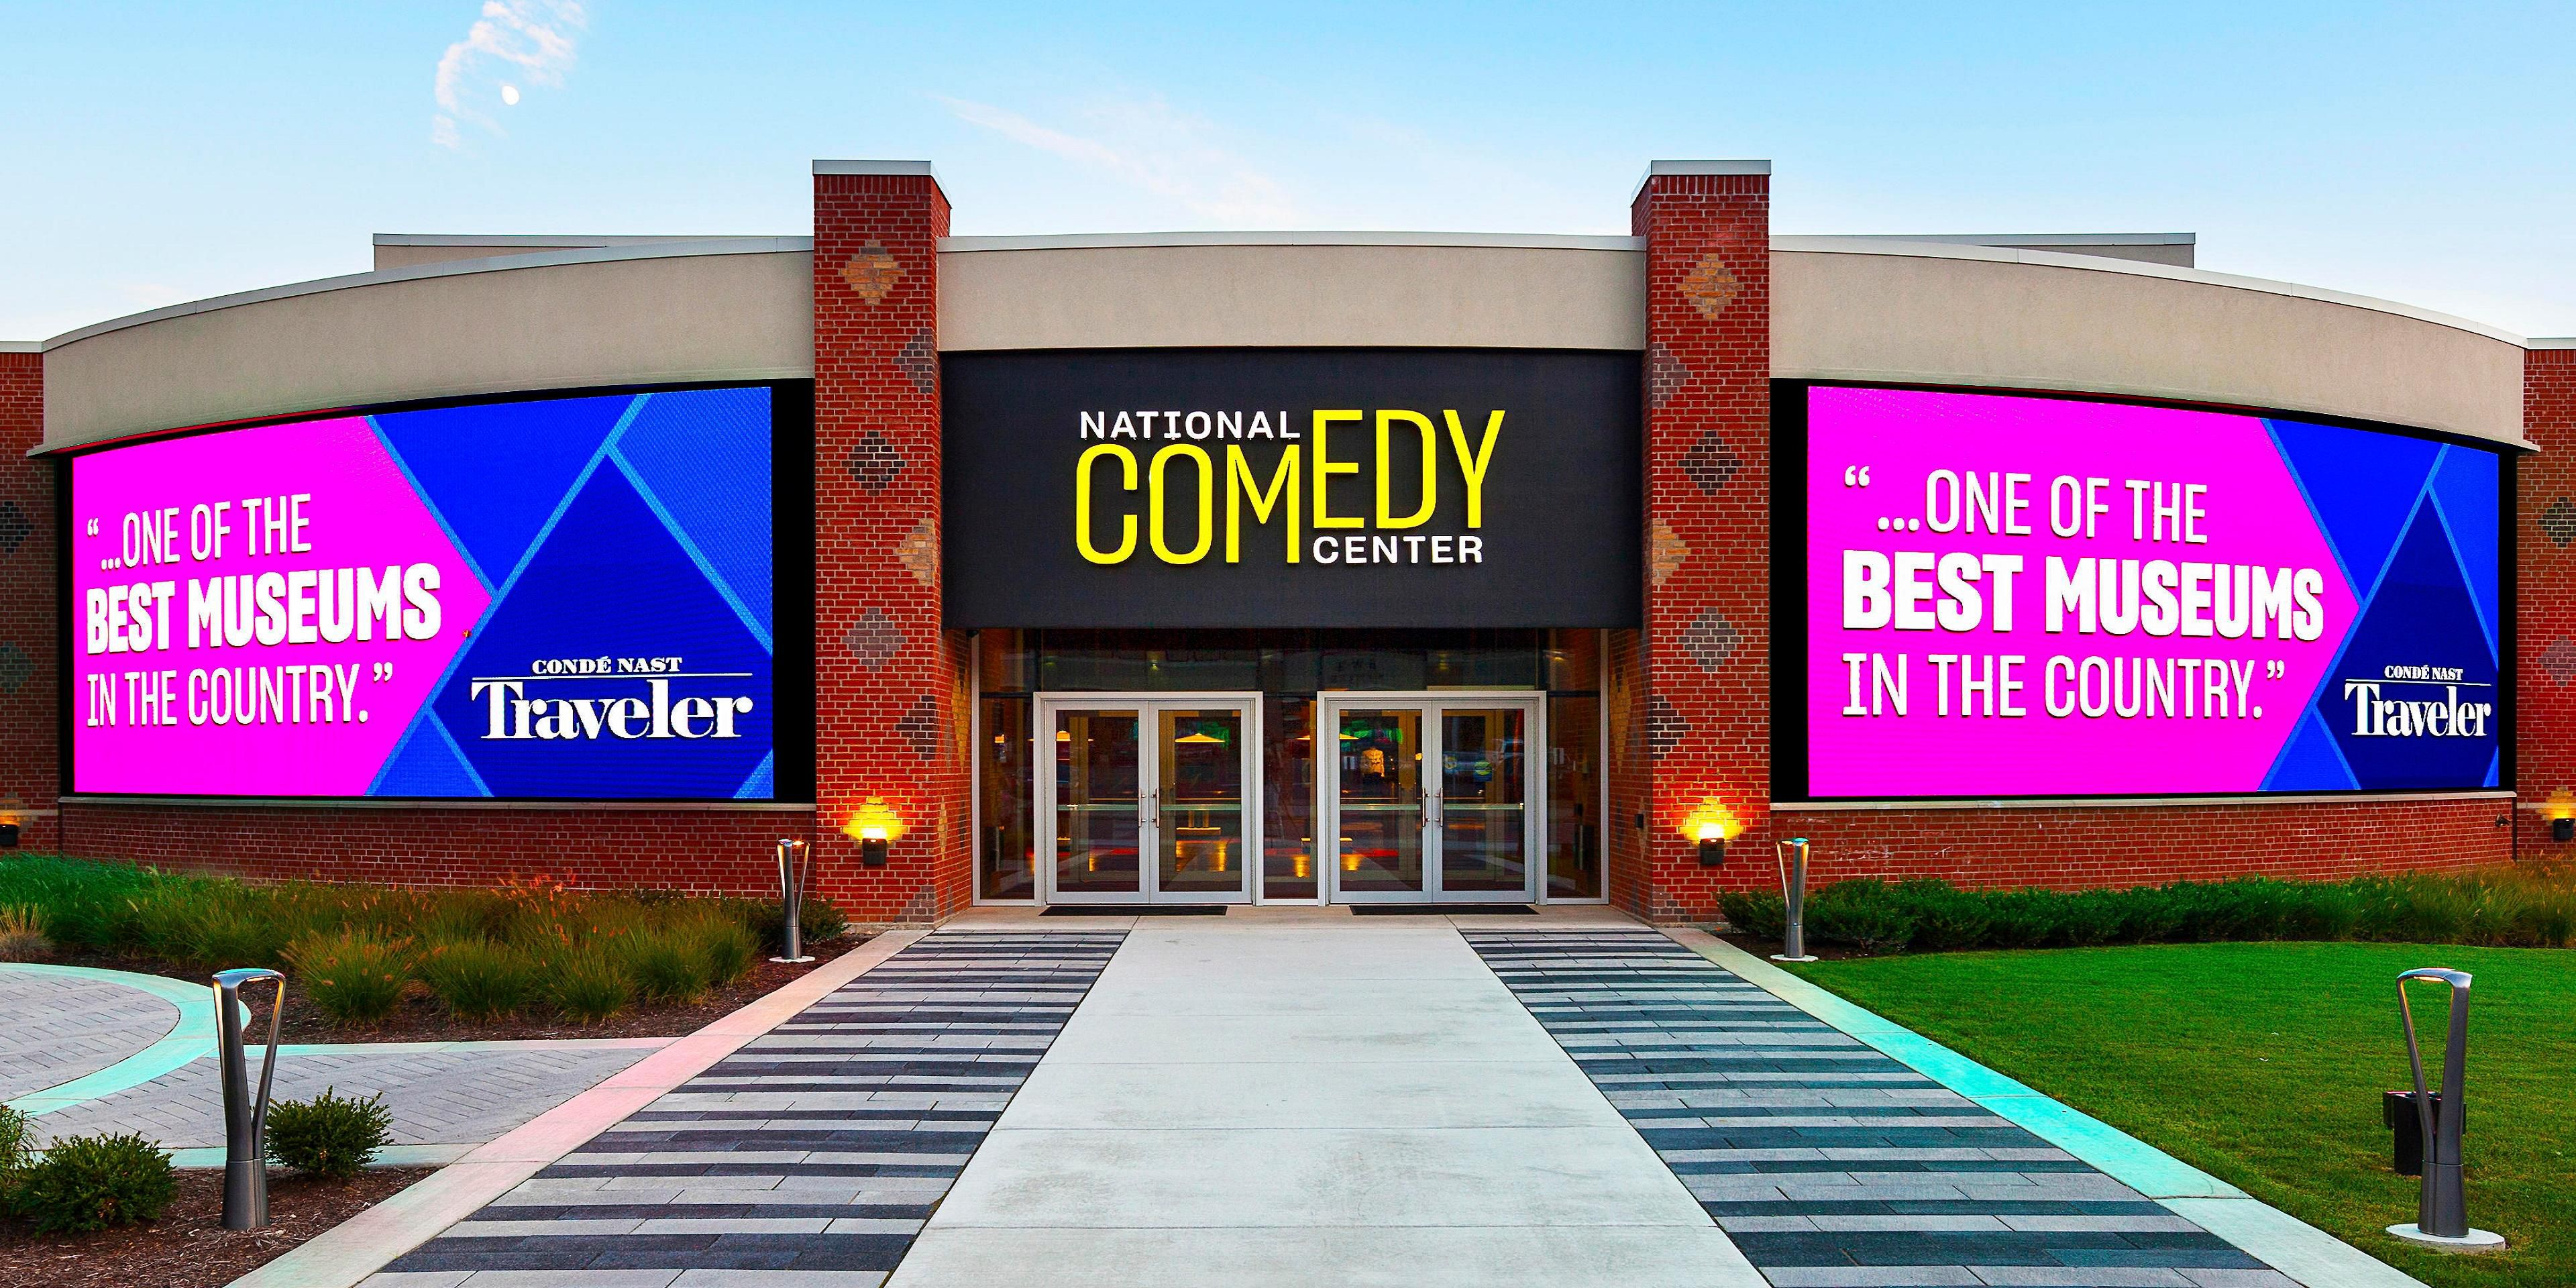 The National Comedy Center is located minutes from the hotel. It is also located in the same area as the Lucille Ball Museum. Come to Jamestown for some fun and giggles. 